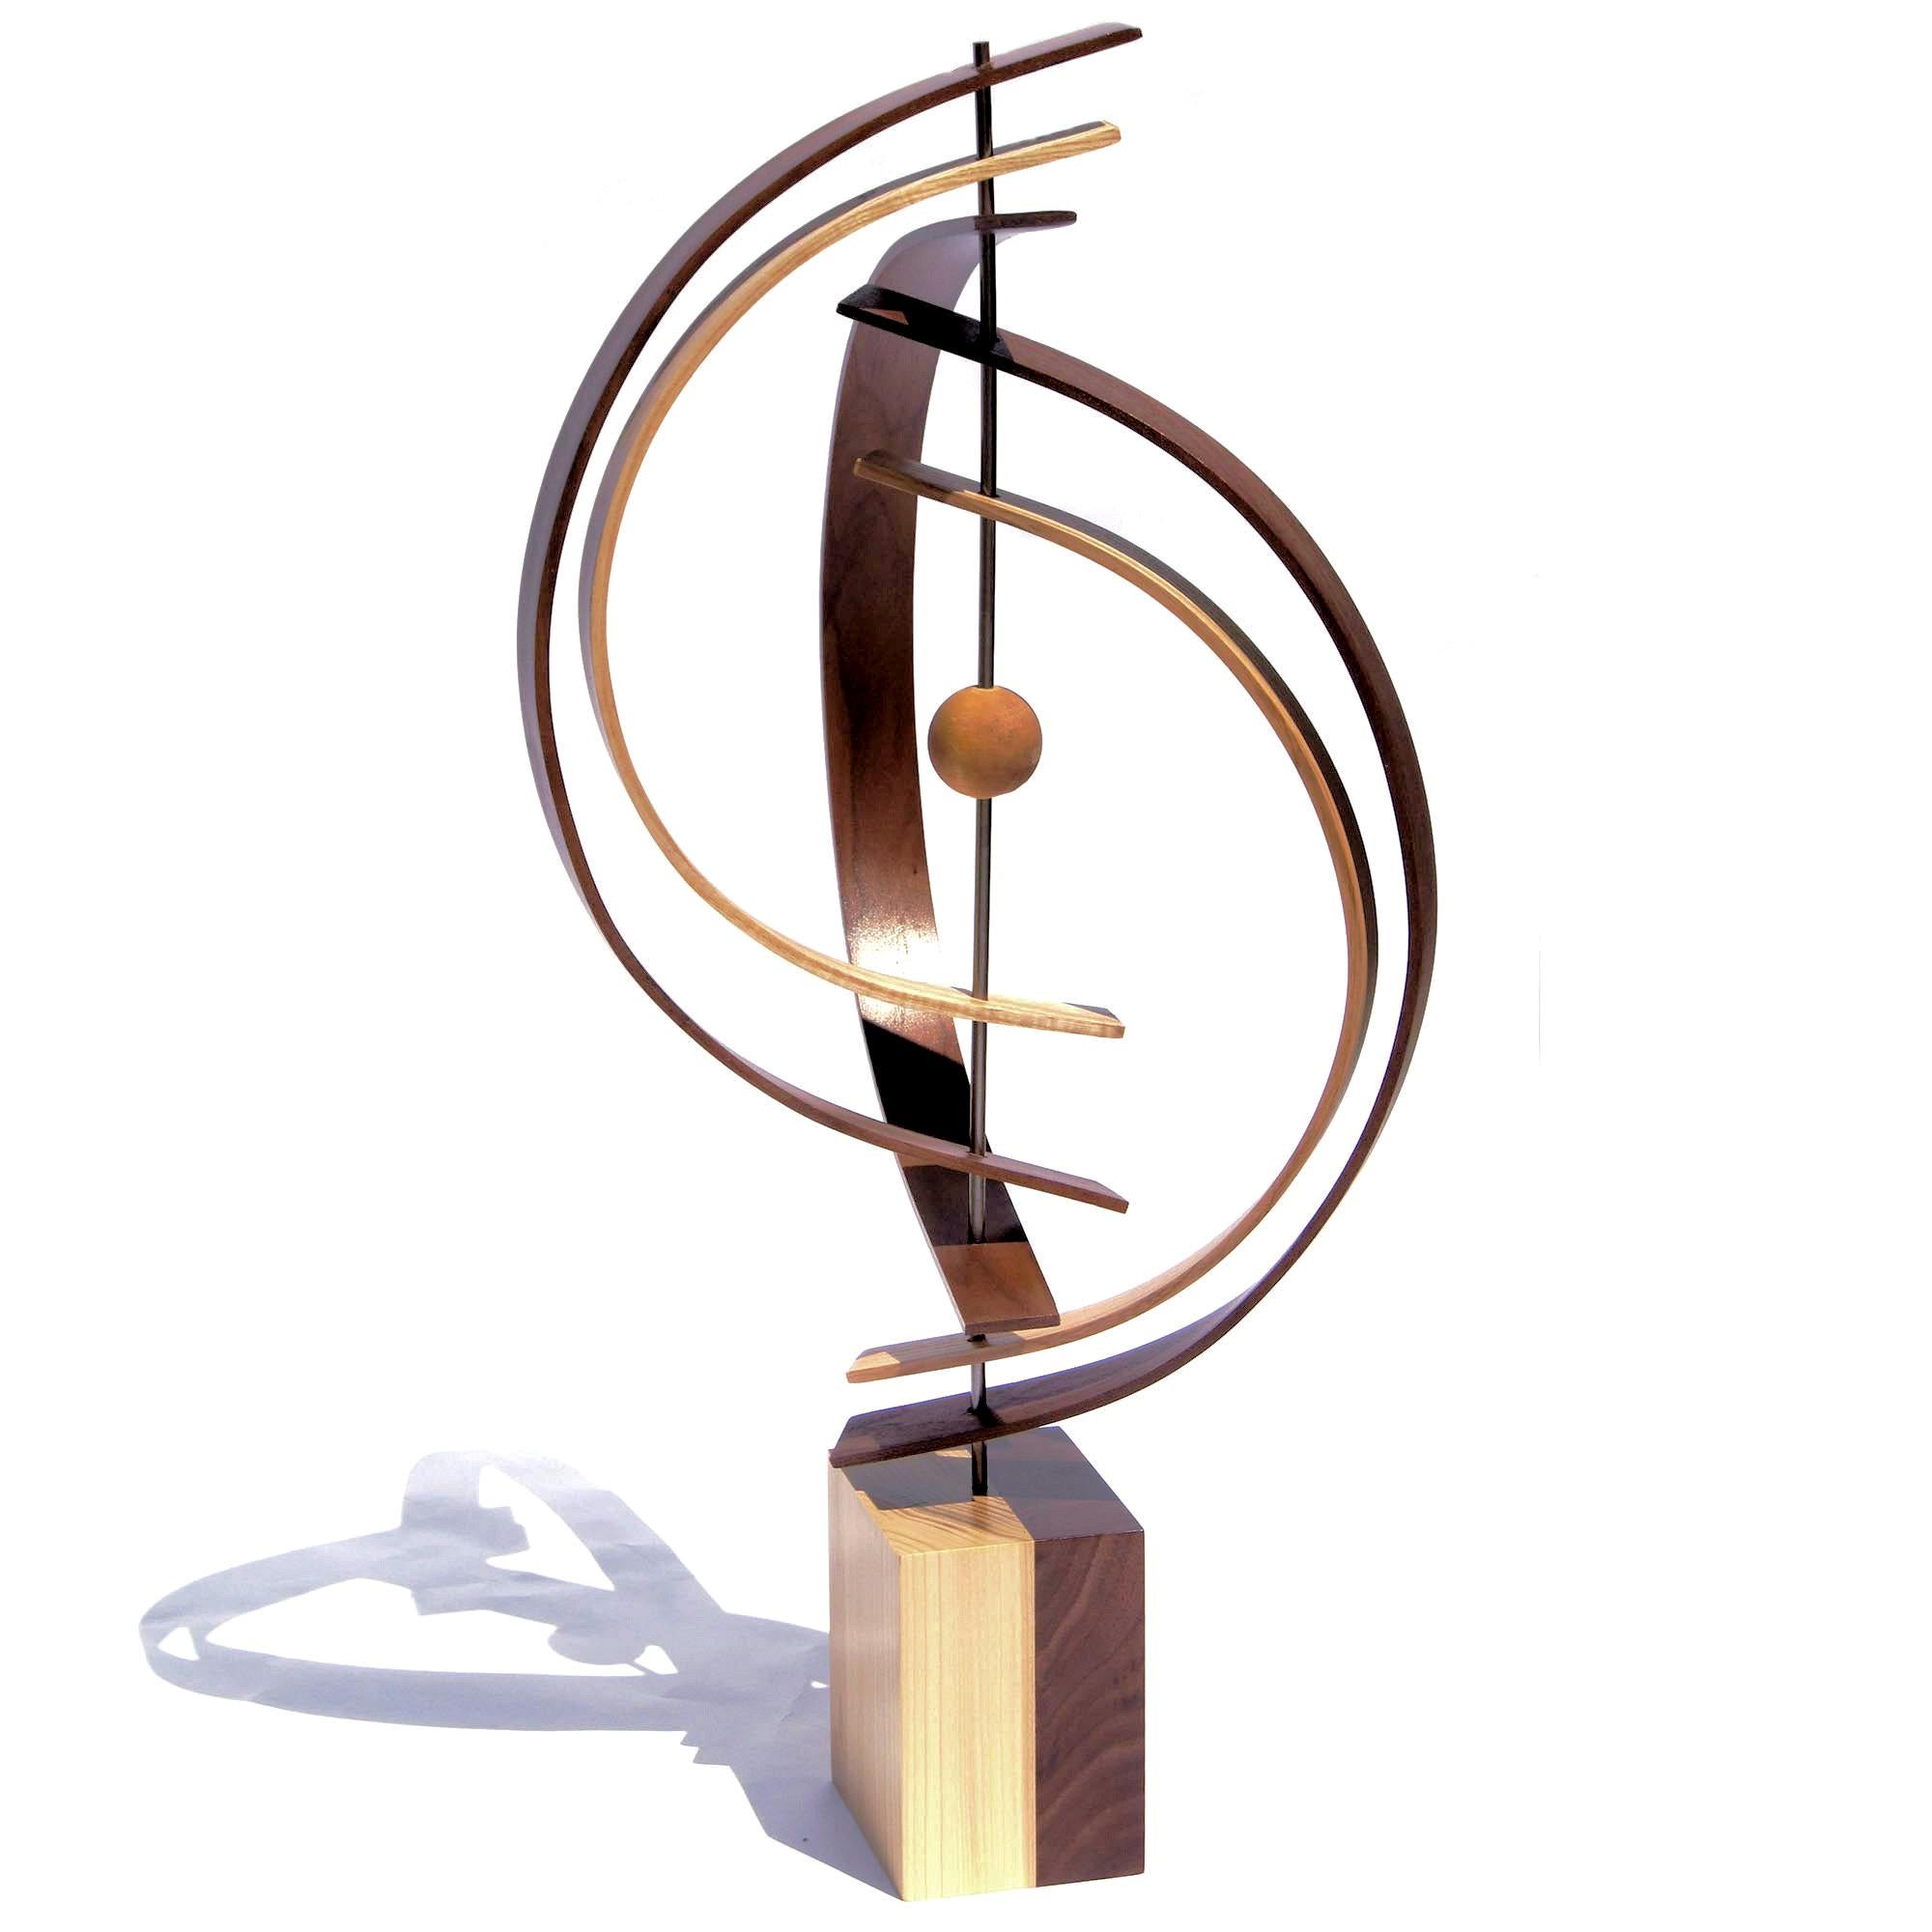 Description:  This sculpture consists of formed black walnut, ash, cherry wood slats, and wood sphere. The base is 5